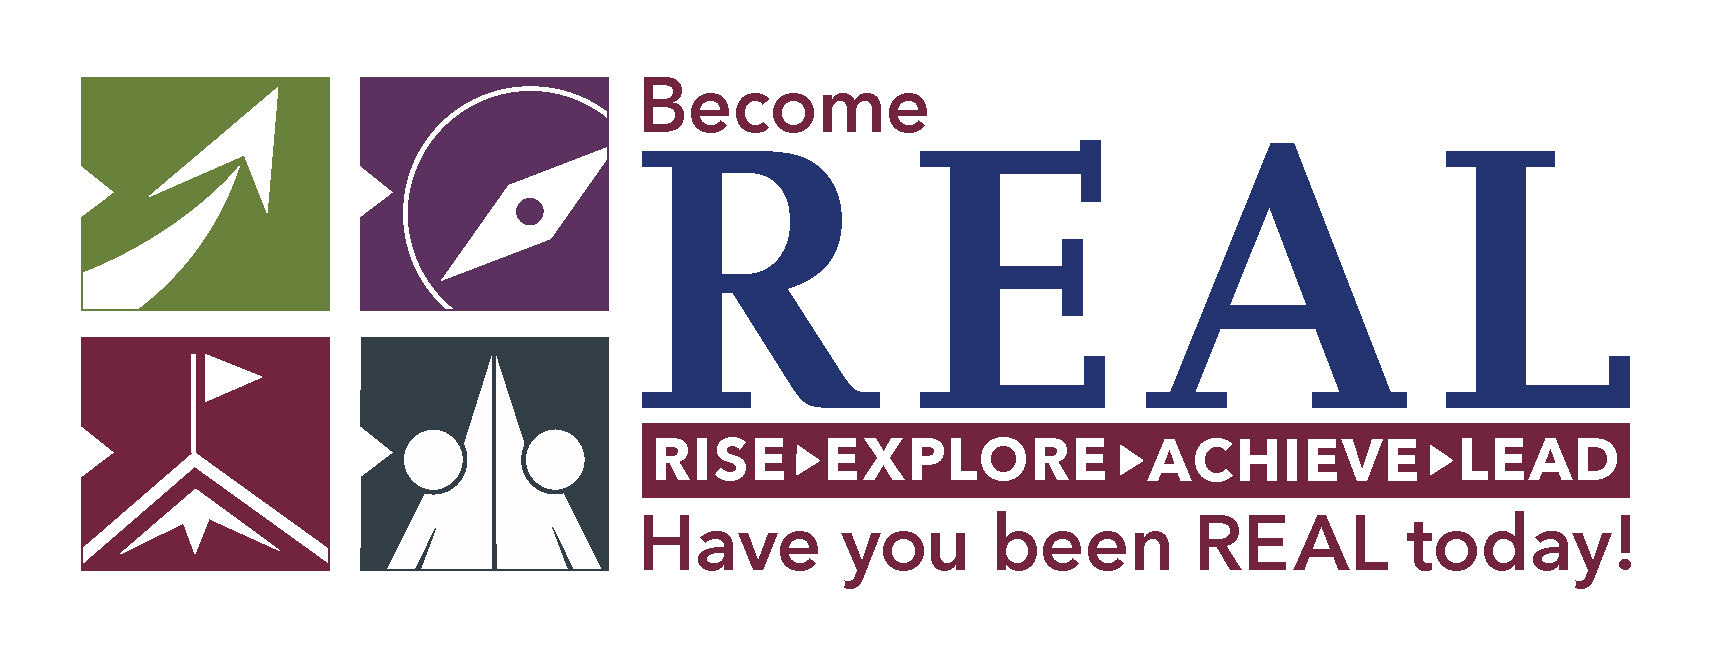 Become REAL: Rise, Explore, Achieve, Lead